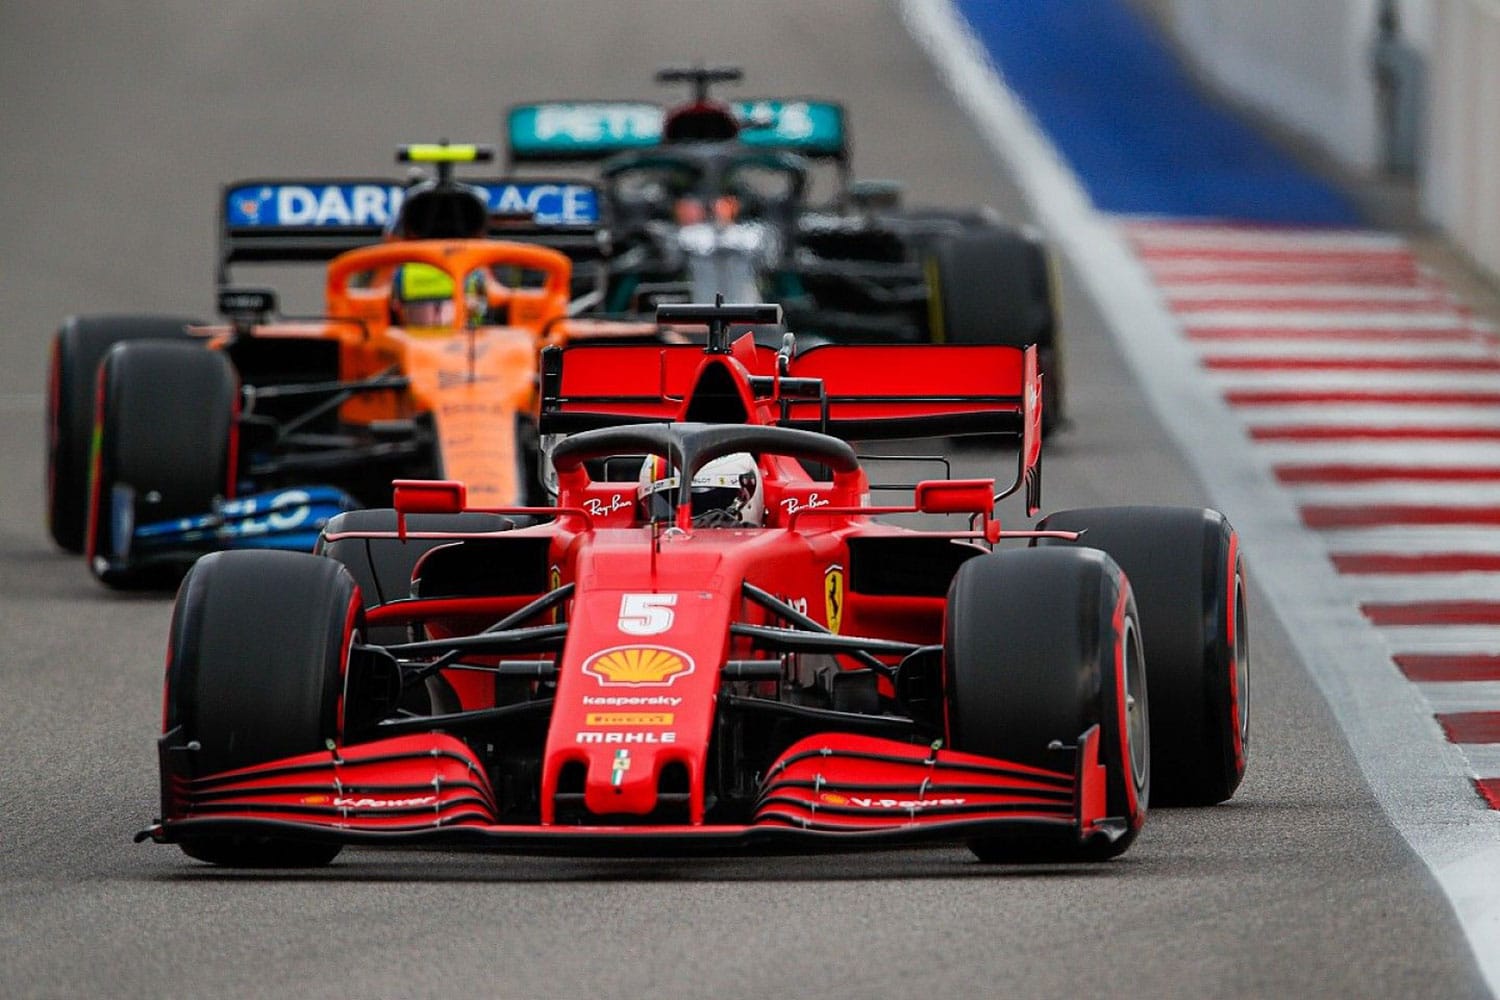 Formula 1 is testing 100% sustainable fuel made from bio waste